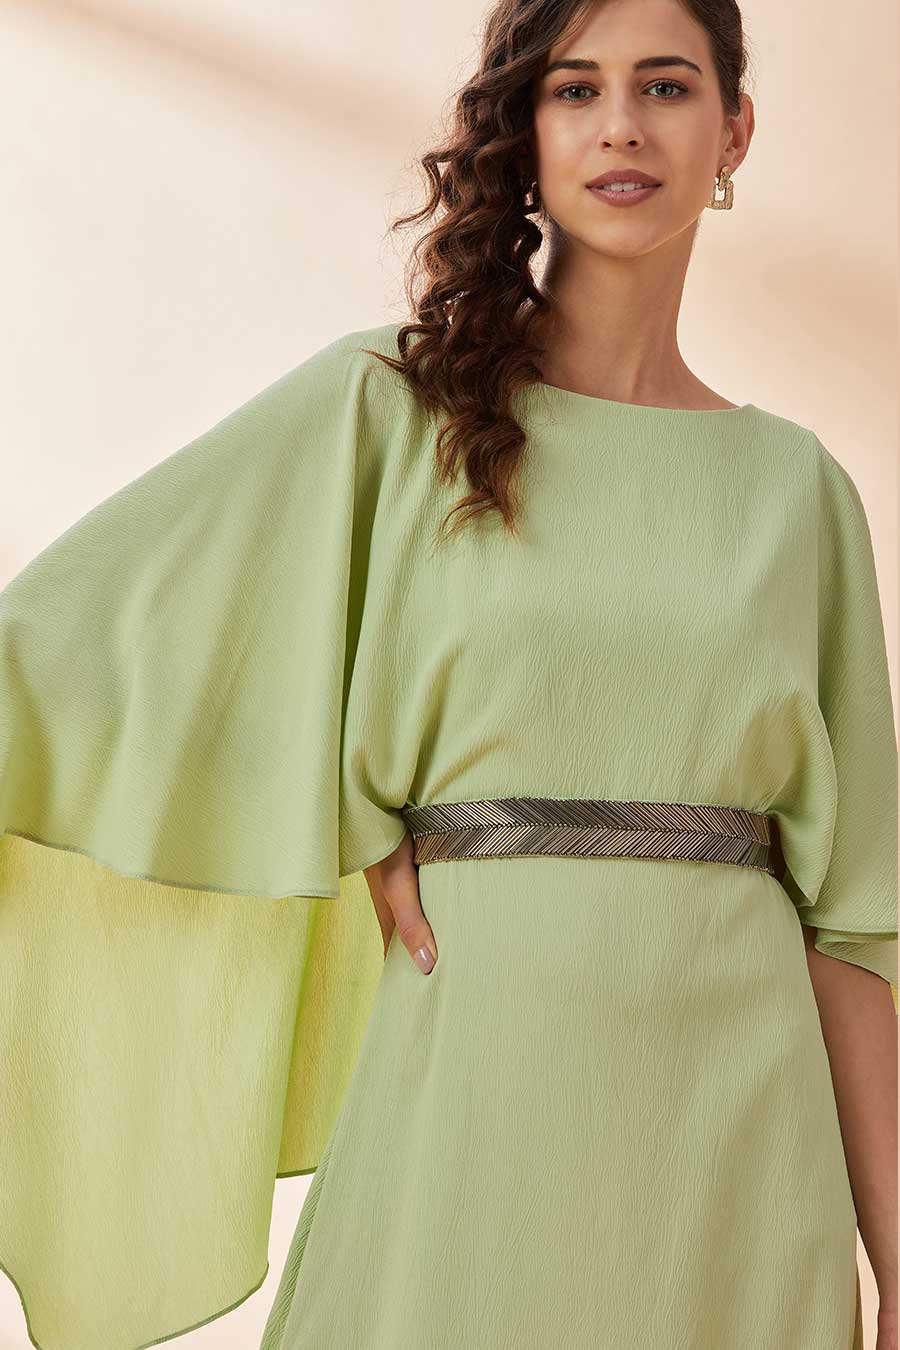 Lime Green Maxi Dress With Belt